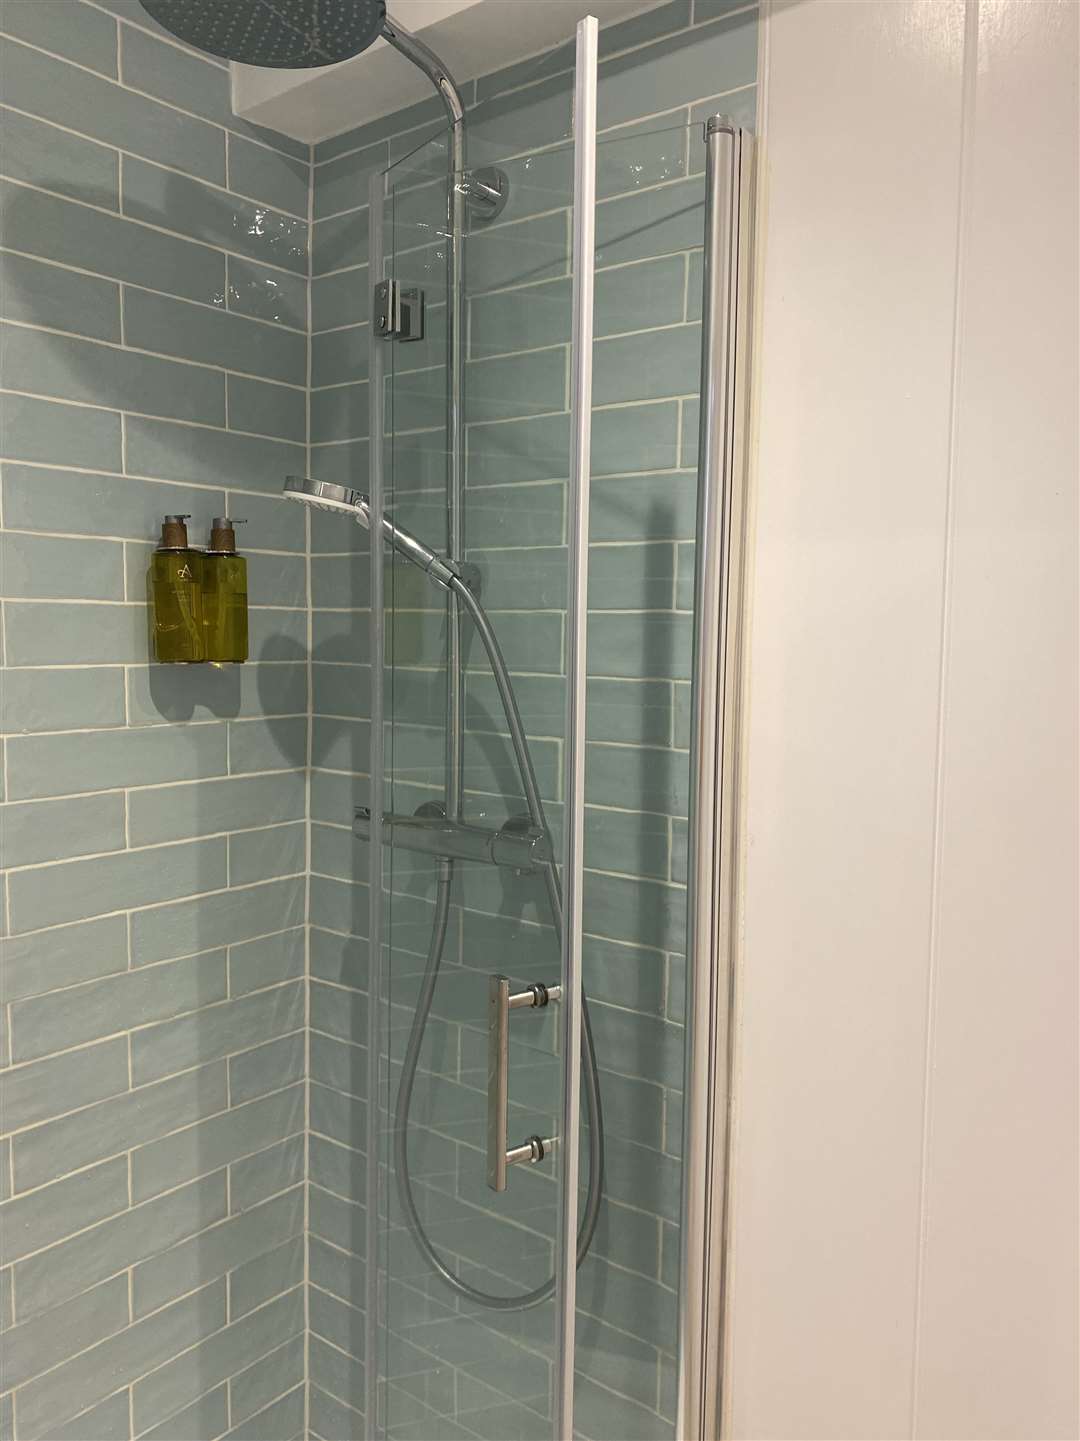 The shower in the spa changing room.